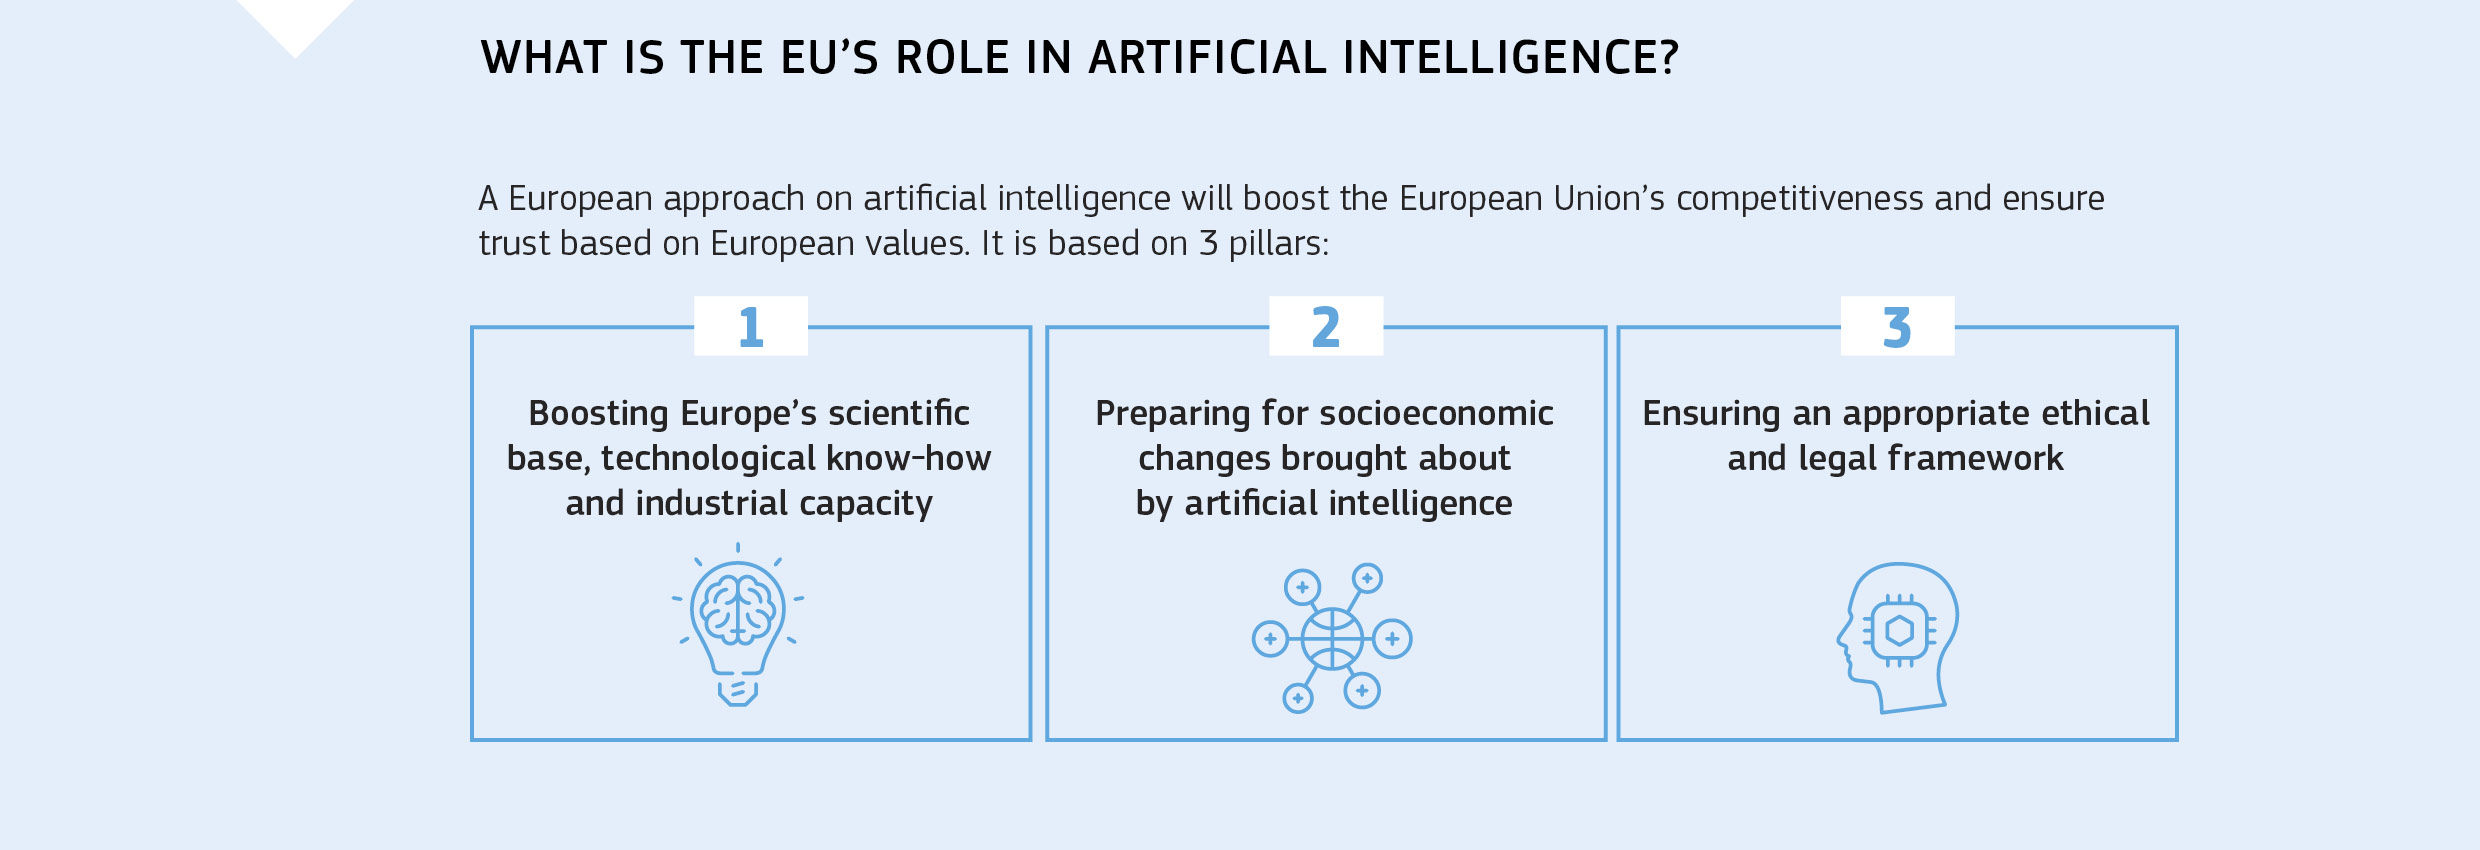 WHAT IS THE EU’S ROLE IN ARTIFICIAL INTELLIGENCE?